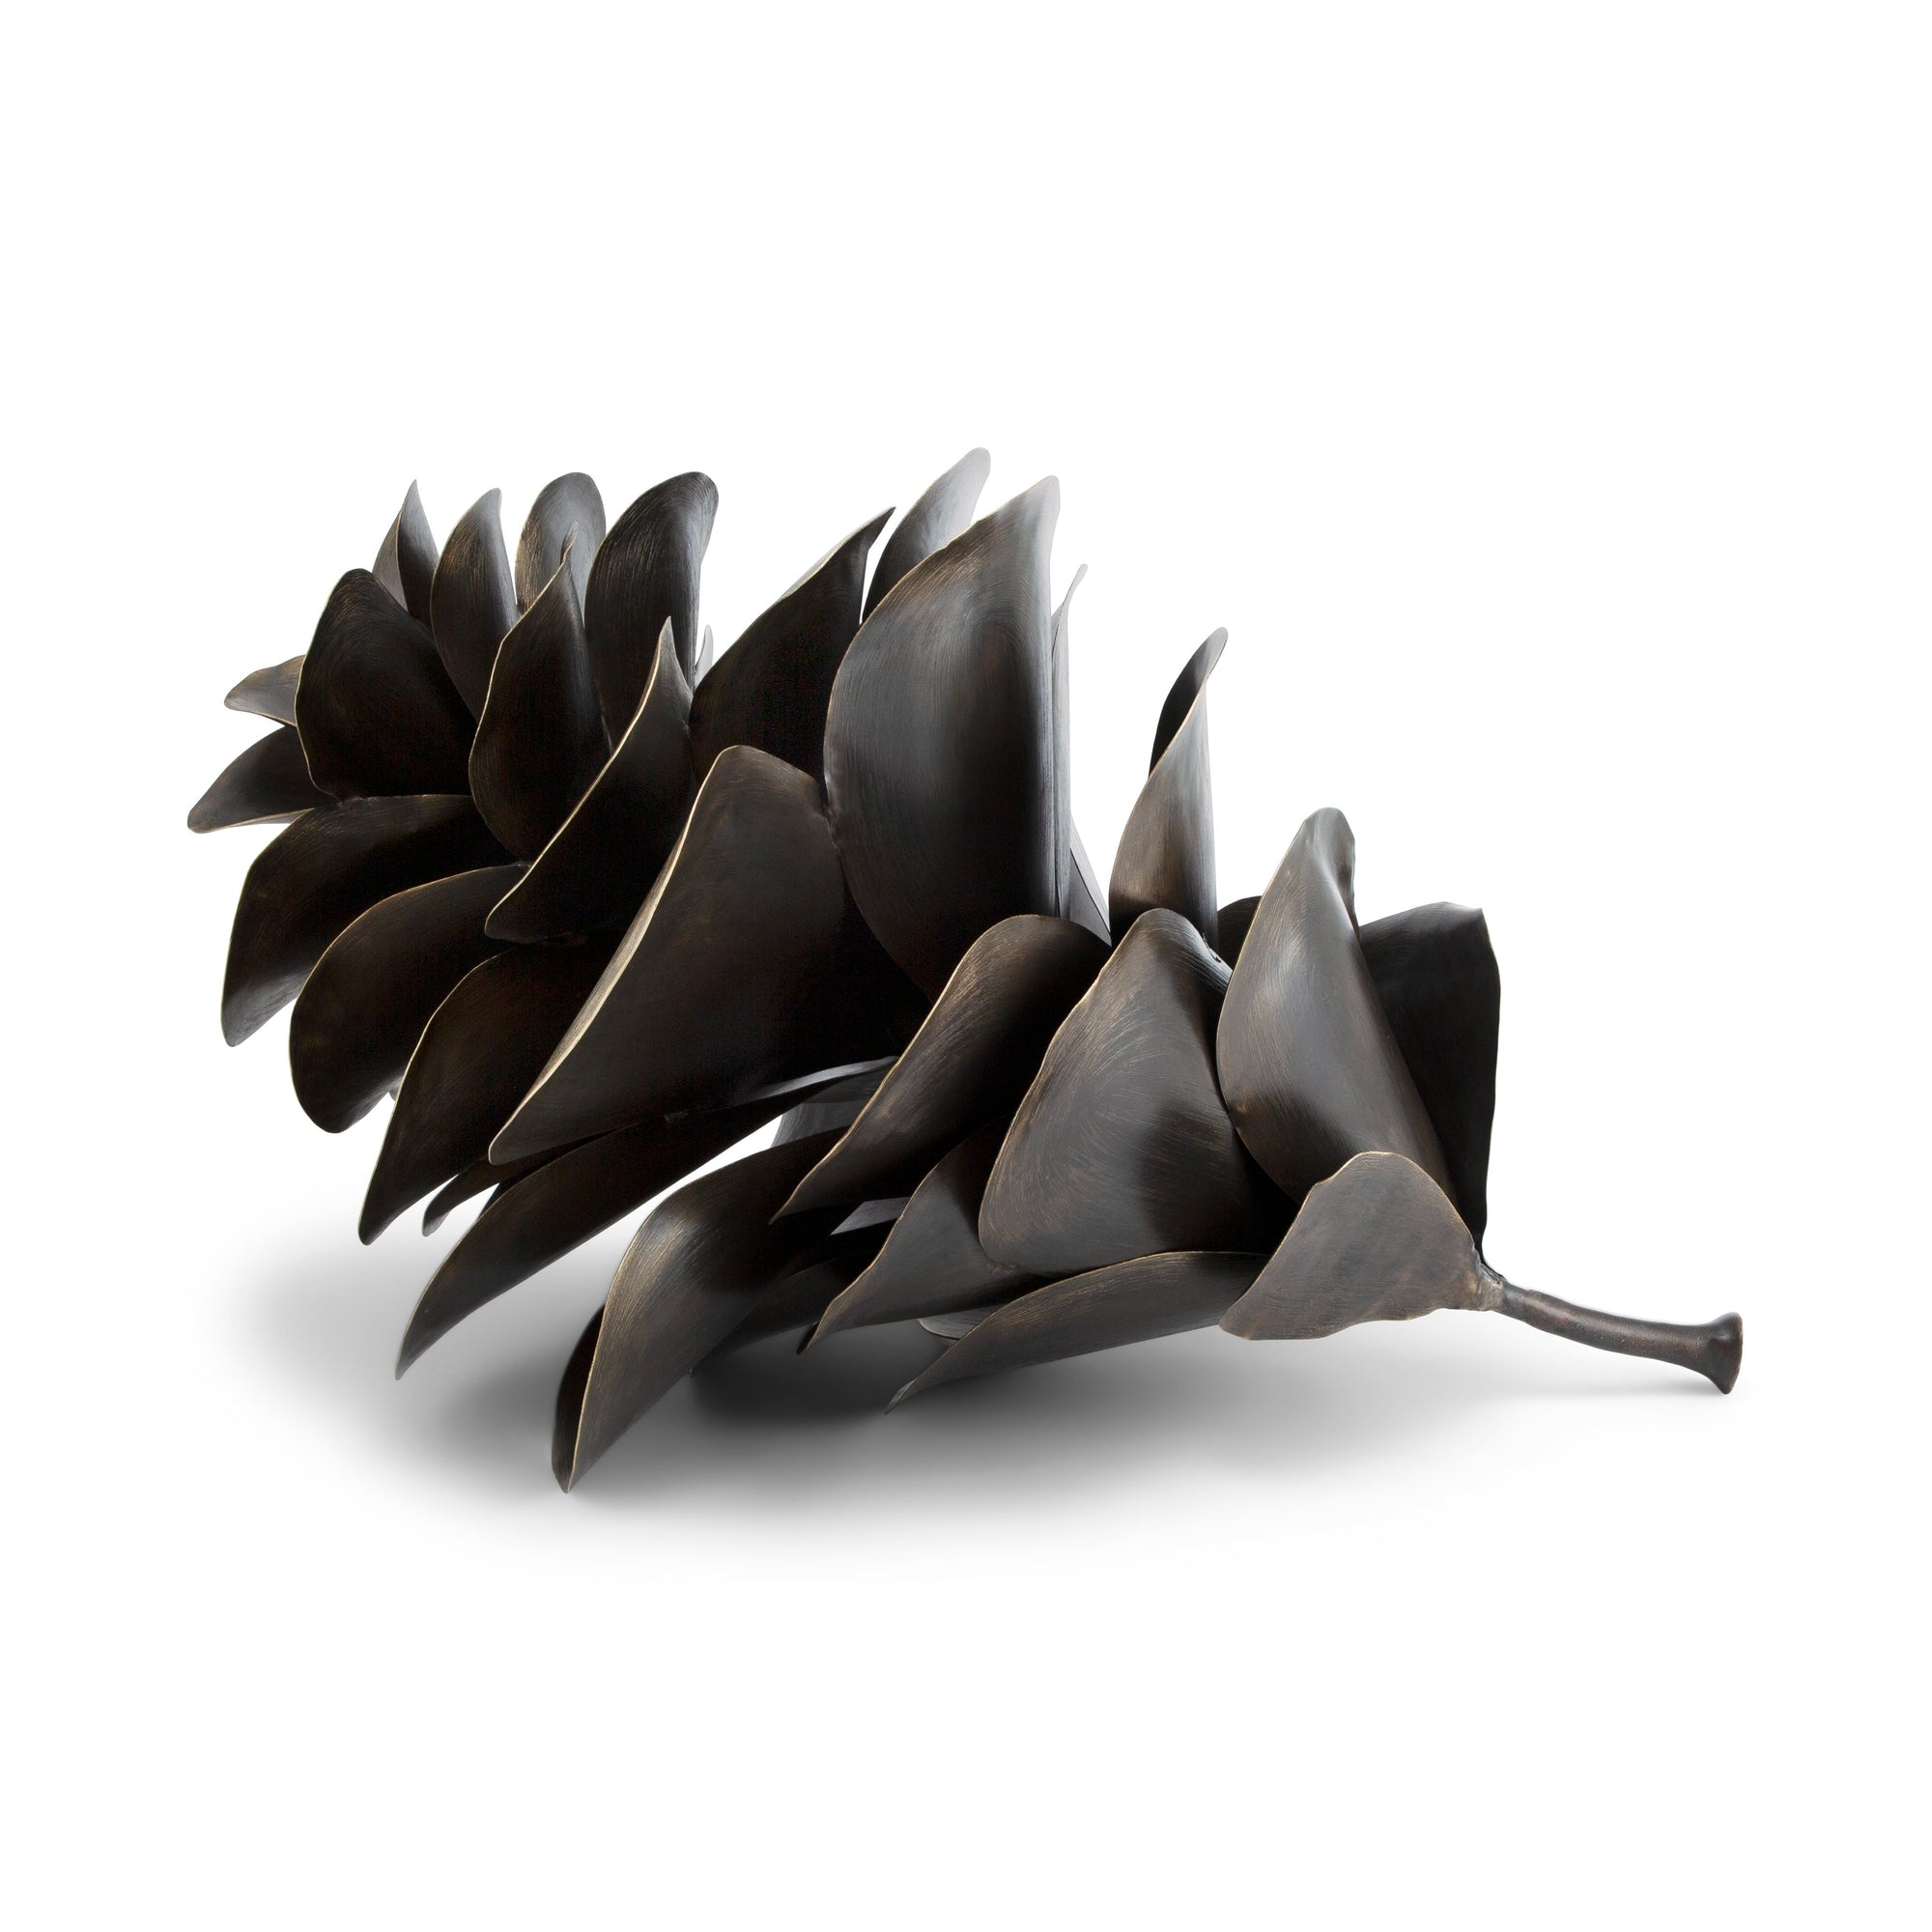 Michael Aram Pine Cone Object (Limited Edition of 500)